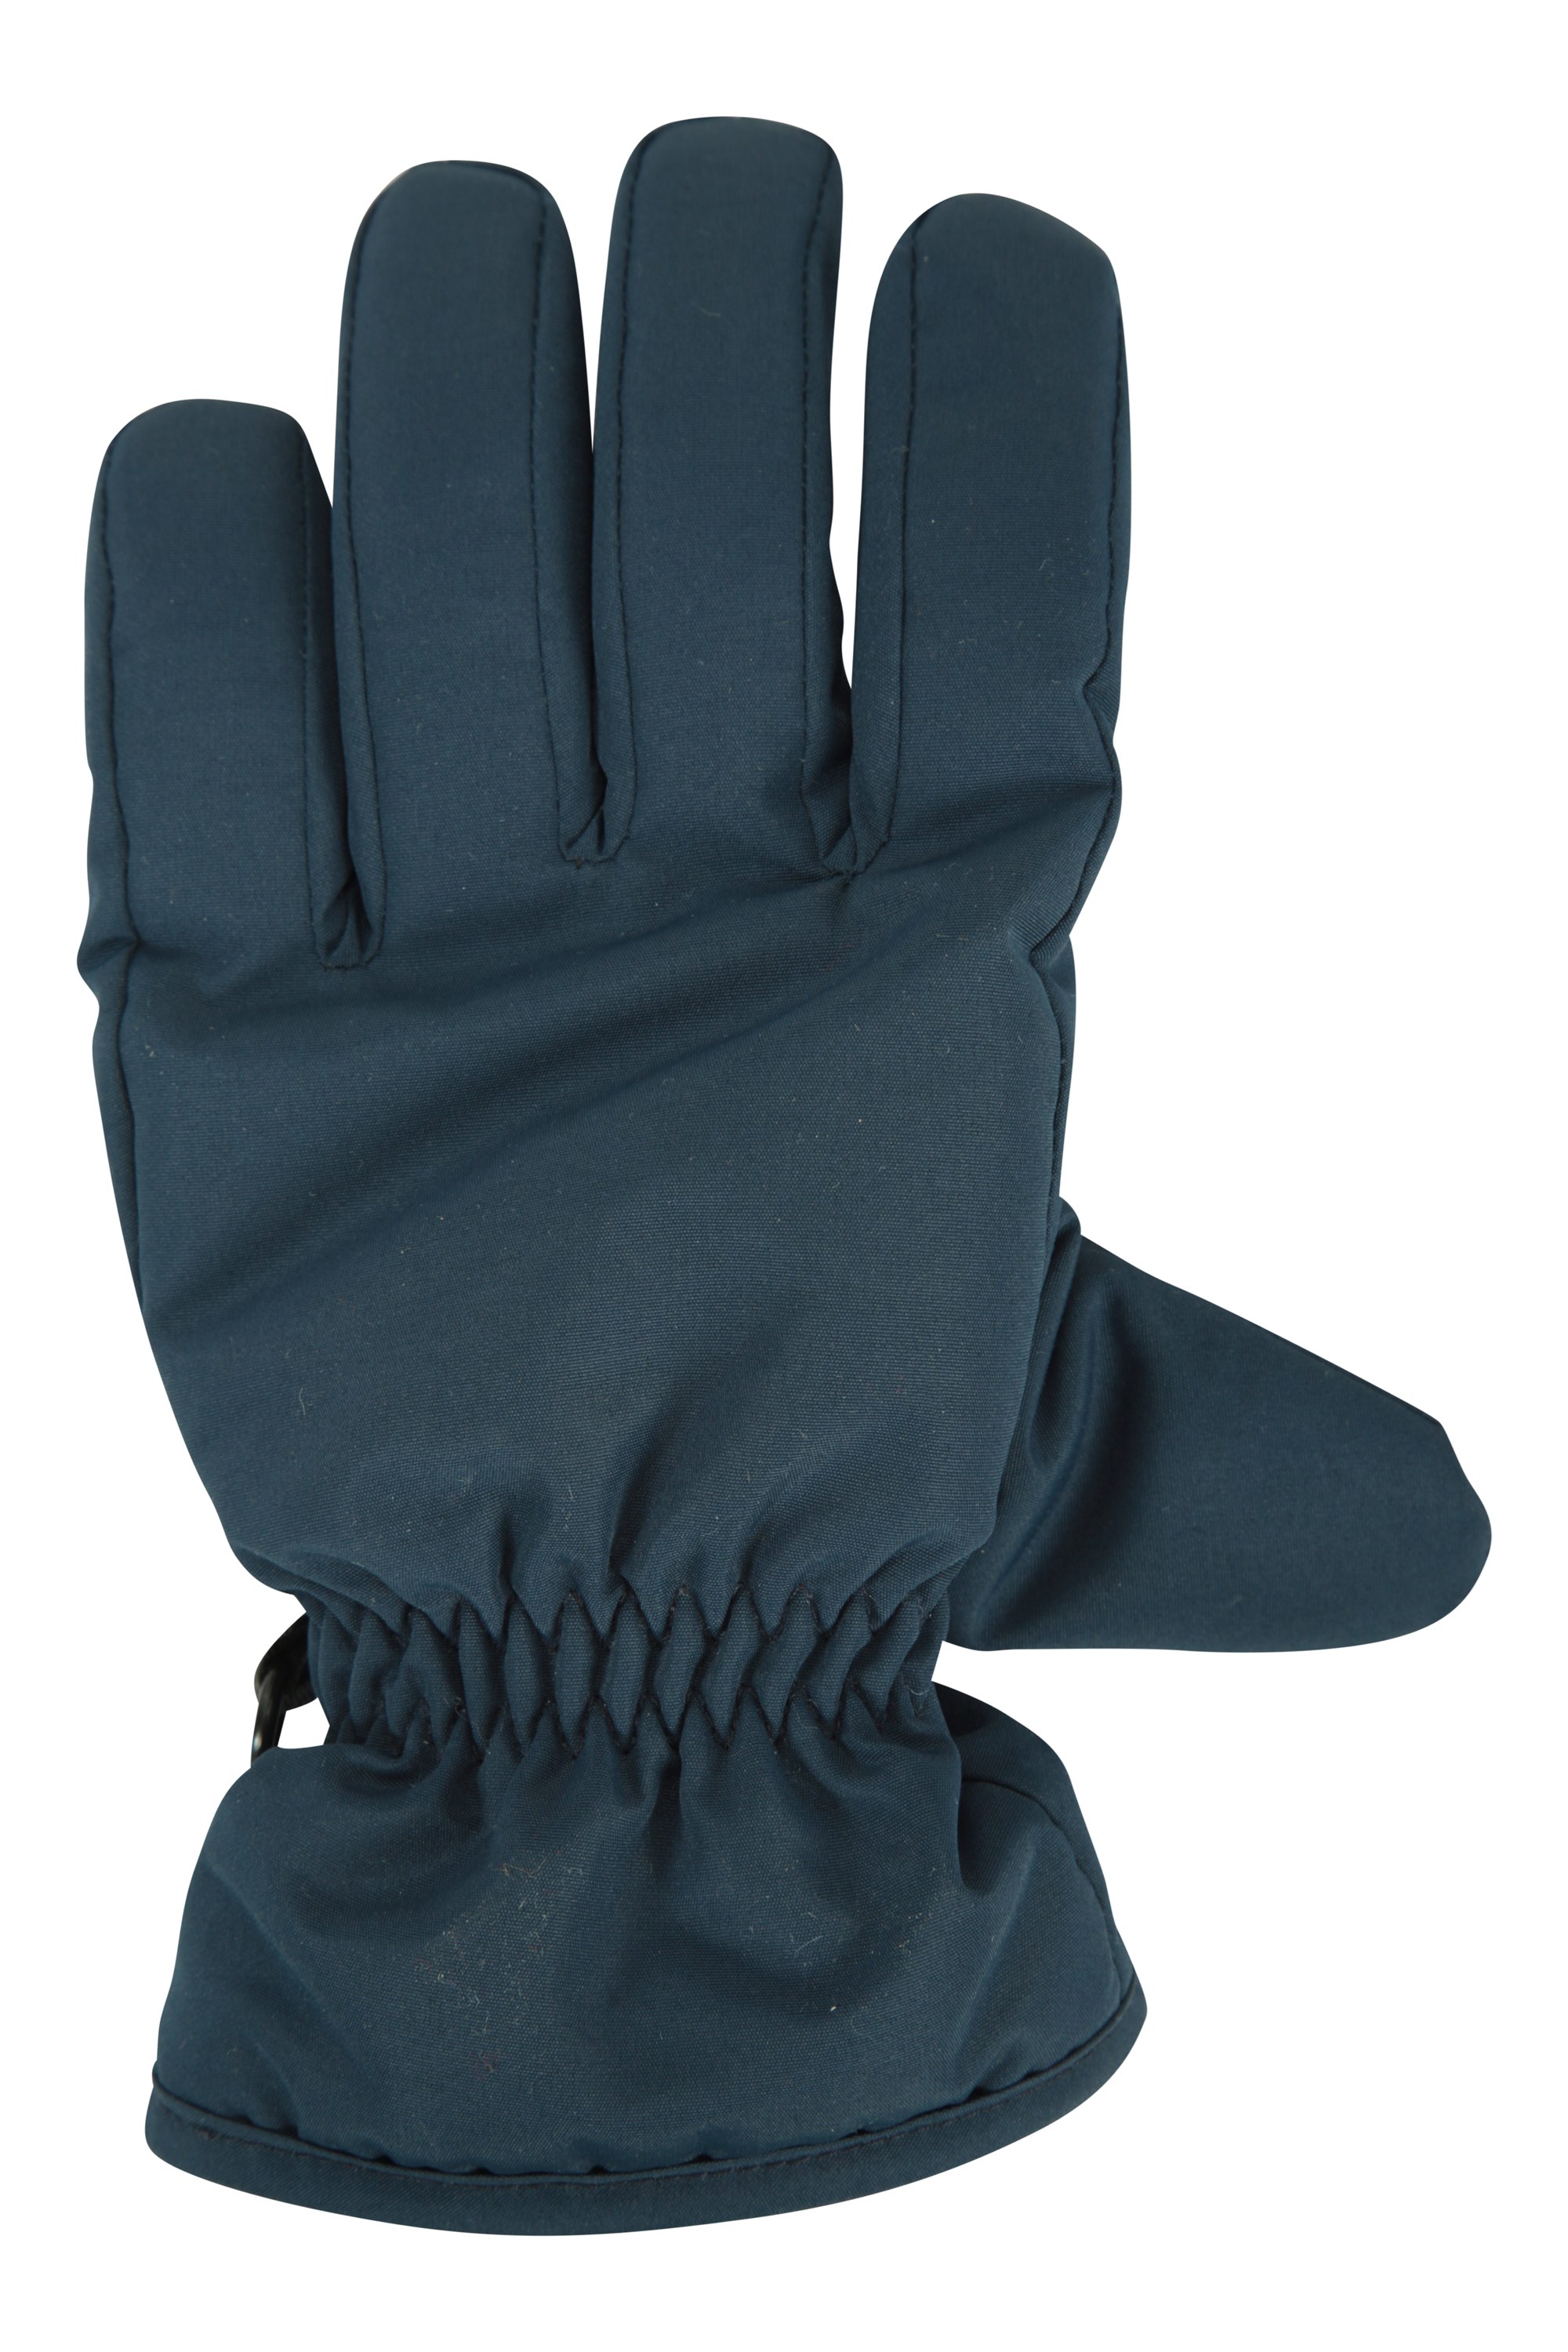 Boys Winter Gloves Suitable for Children Aged 7-15 LHY KIDS SPORTS   Childrens Ski Gloves Childrens Gloves for Skiing Or Cycling 